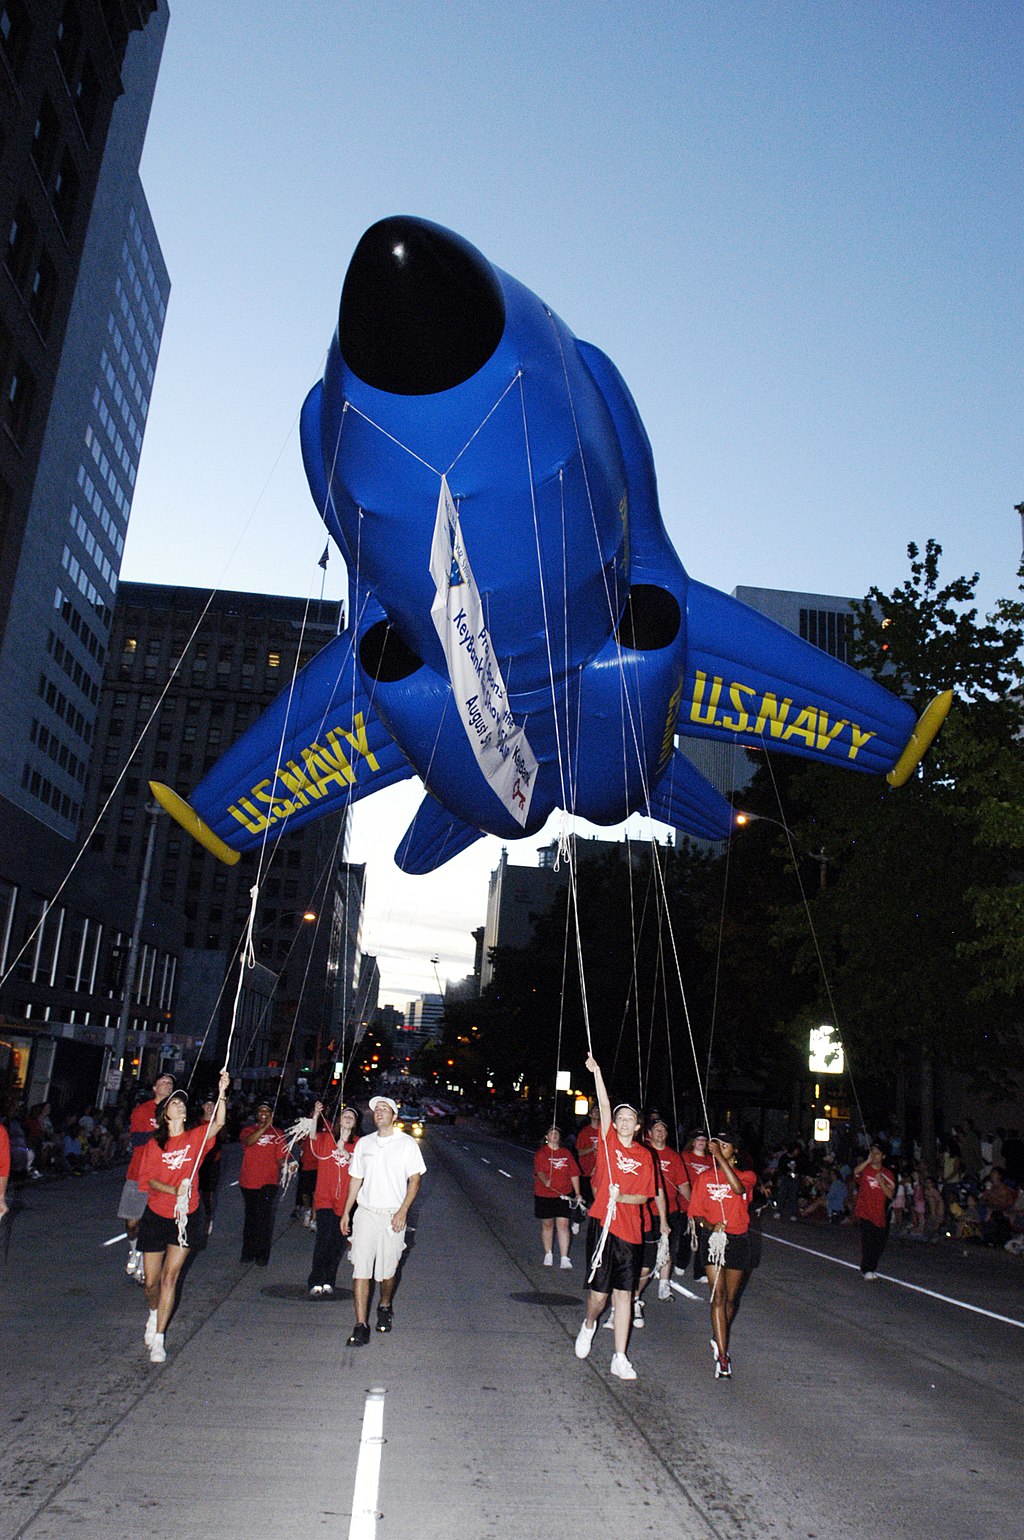 U.S. Navy Blue Angels balloon in 2005 Seattle Torchlight Parade photo by U.S. Navy photo by Photographer's Mate 2nd Class Eli J. Medellin [public domain]